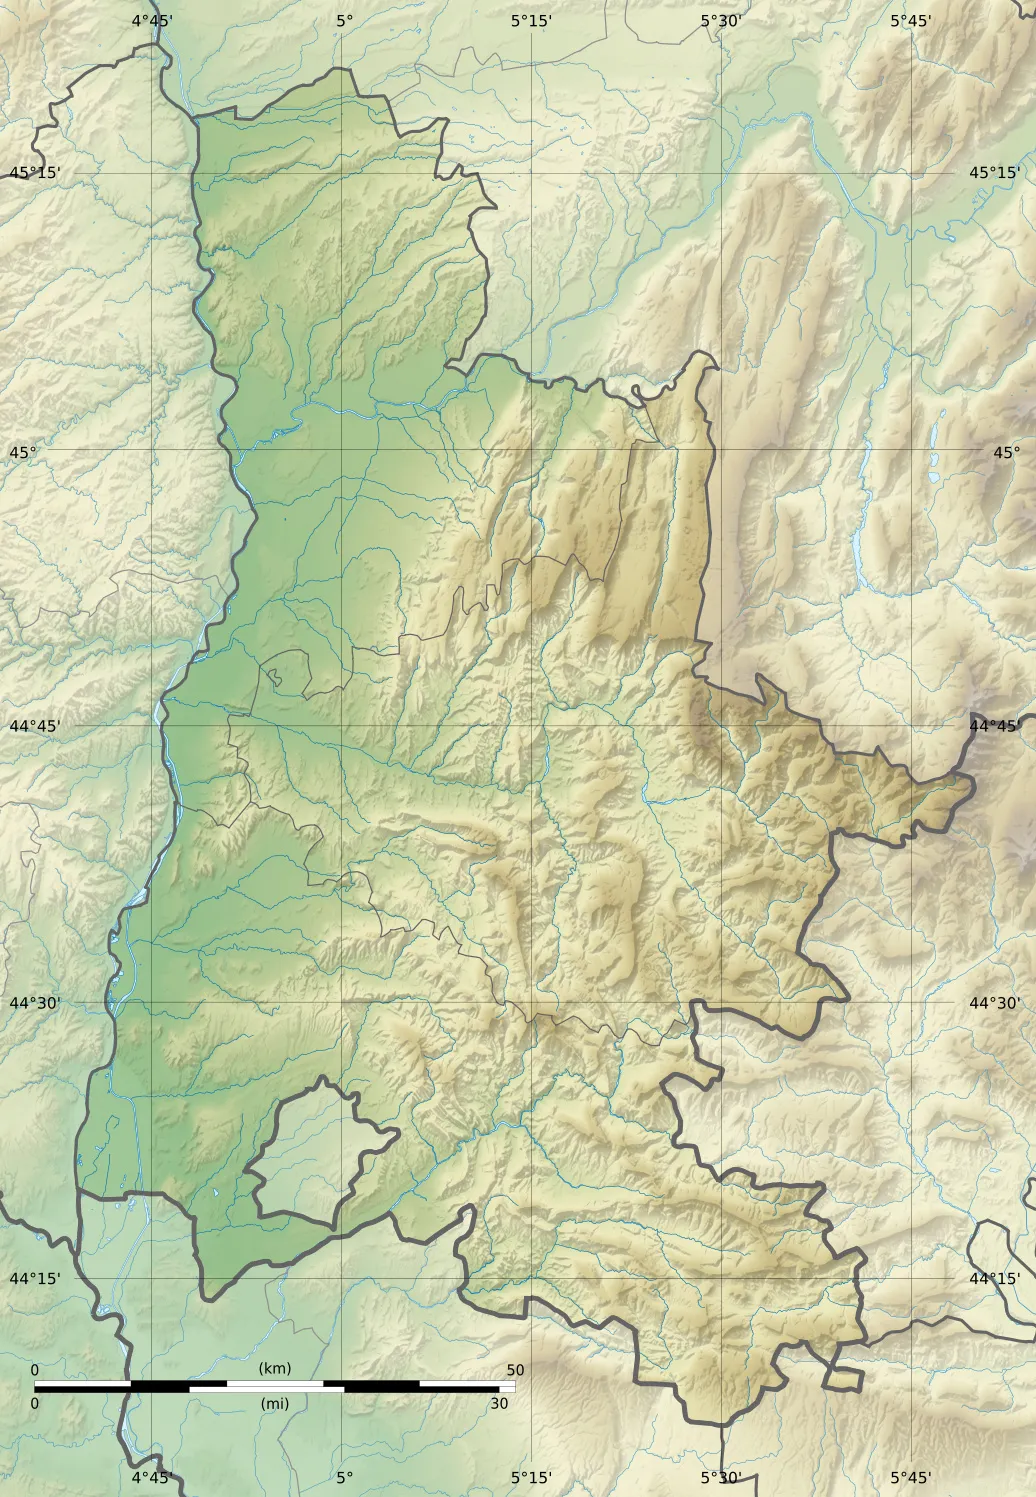 Photo showing: Blank physical map of the department of Drôme, France, for geo-location purpose.